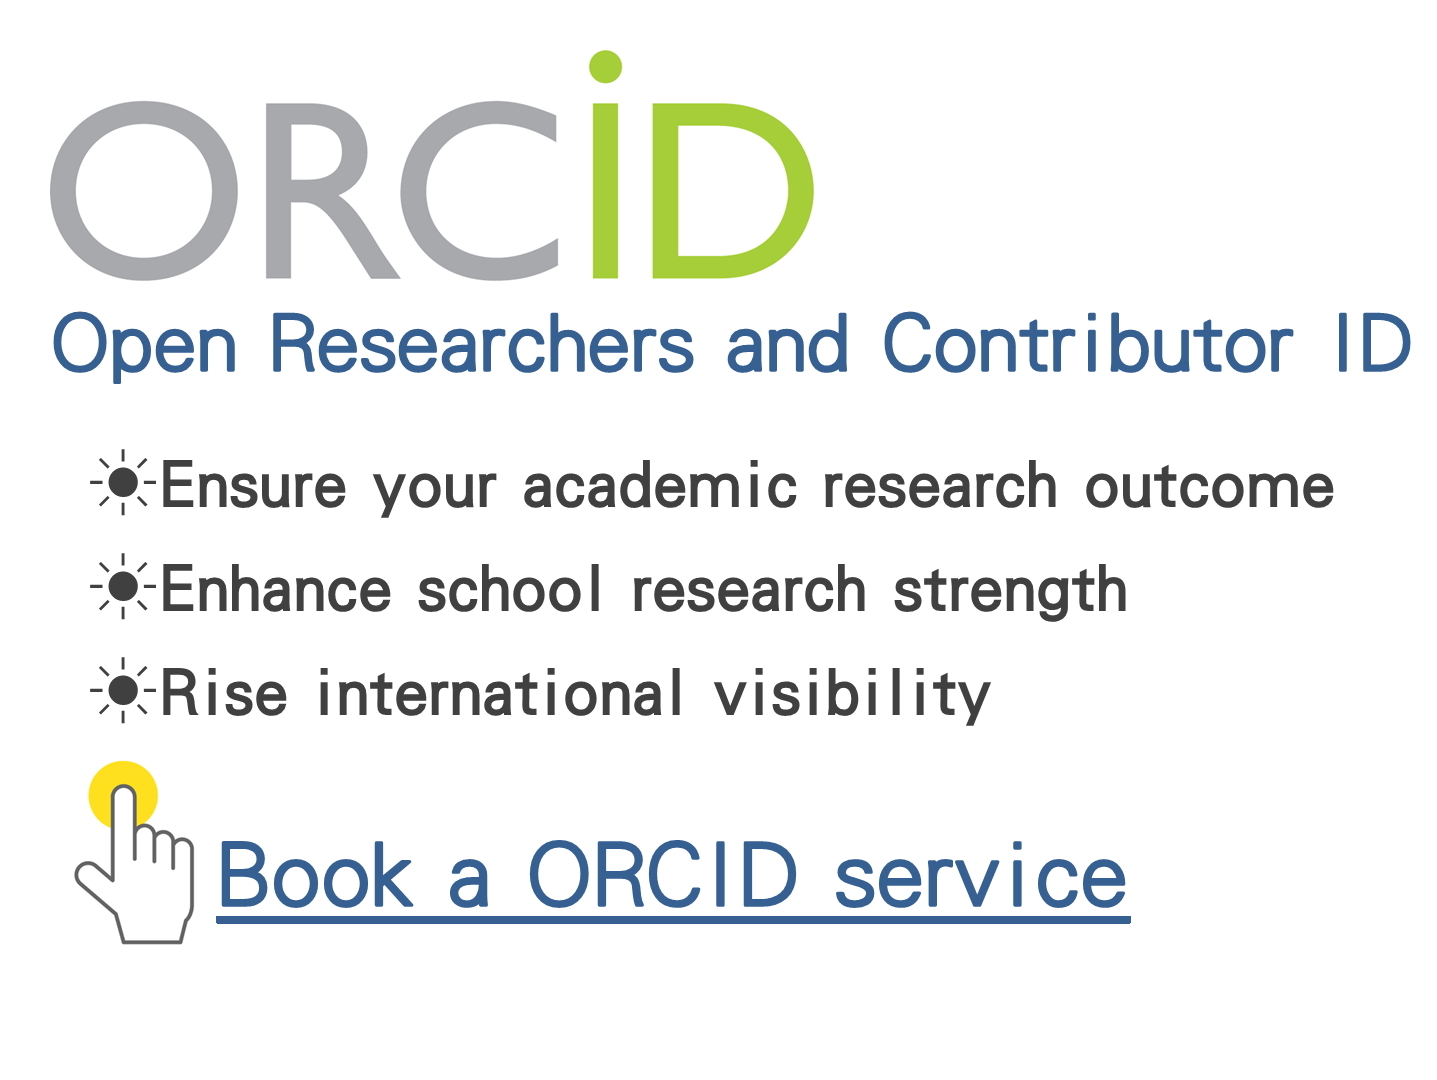 Book a orcid service